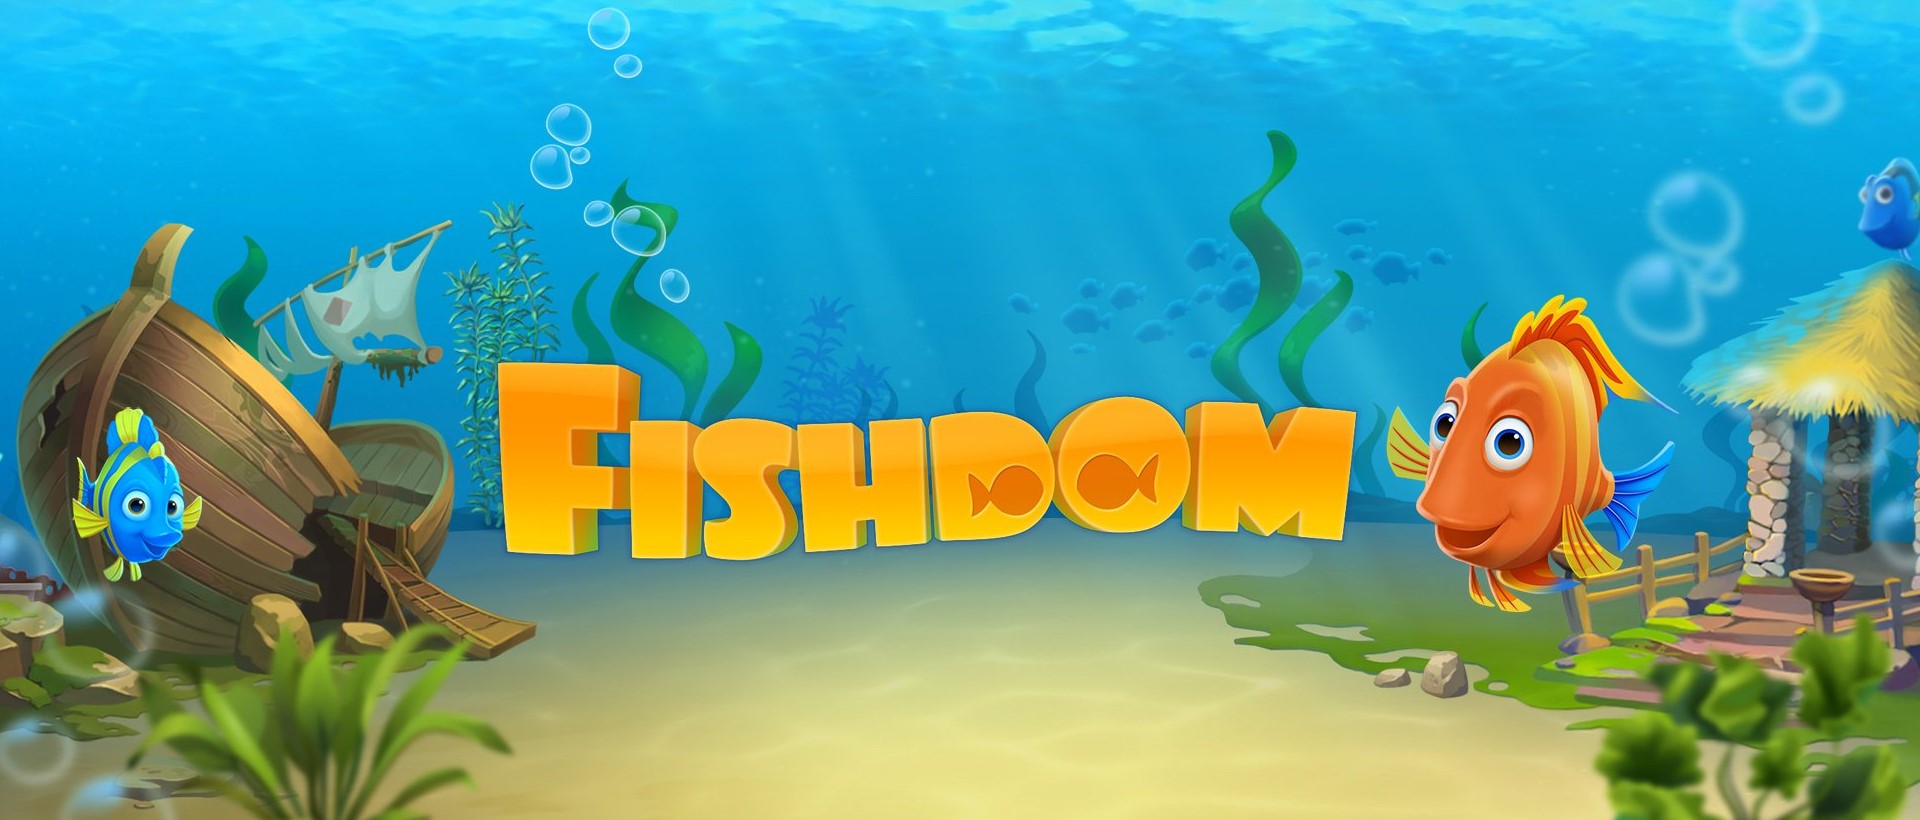 Download Fishdom on PC with NoxPlayerAppcenter